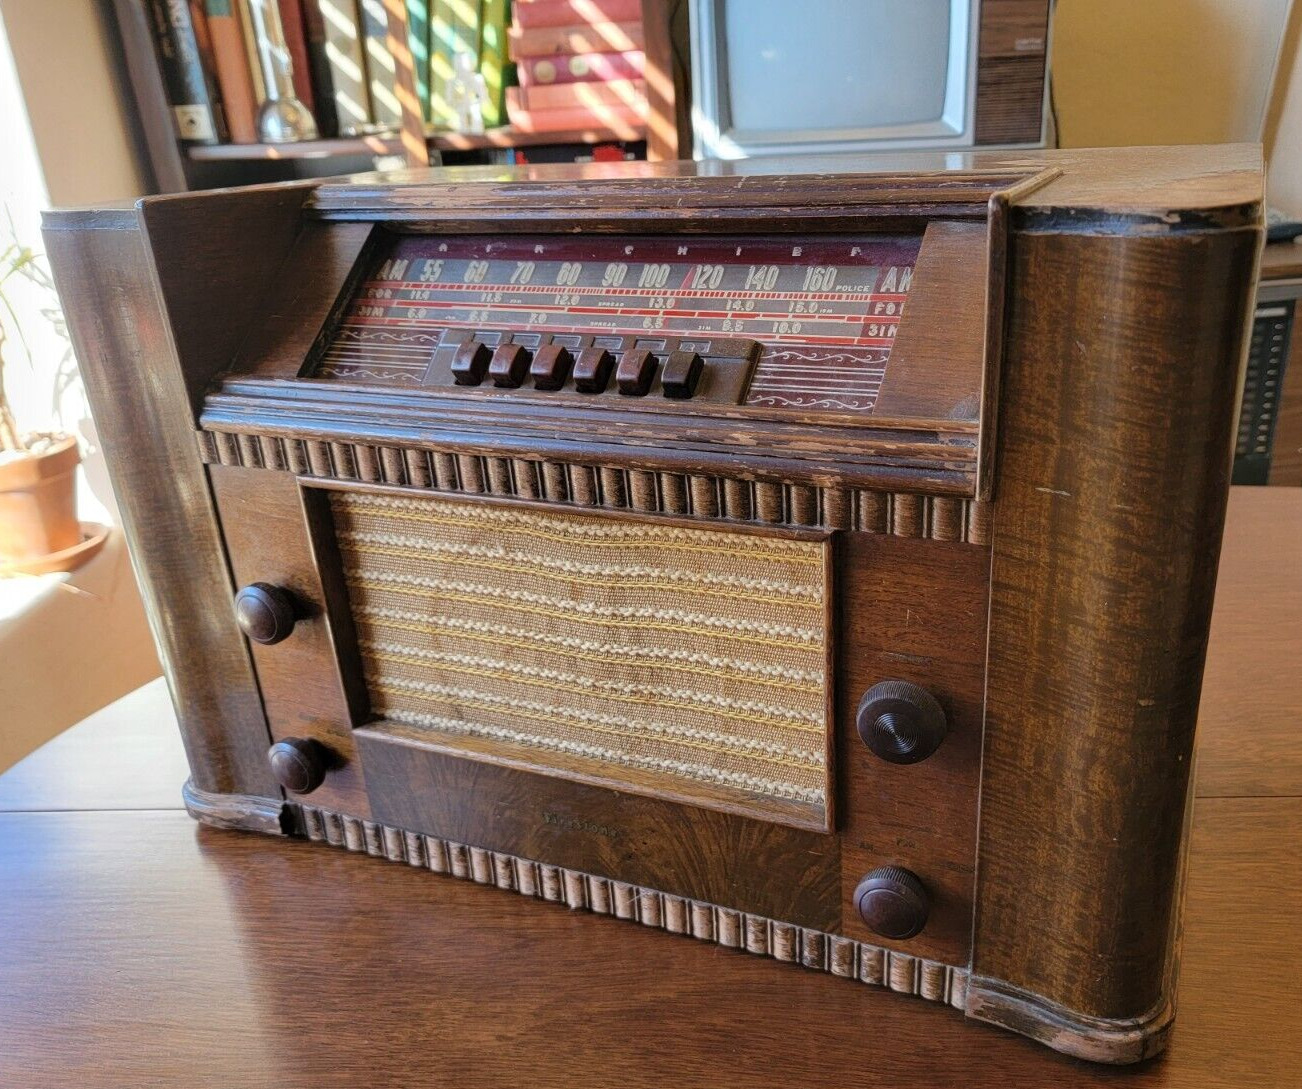 Firestone AIR CHIEF 4-A-23 Vintage & RARE Tube Radio, Lovely Restoration Project